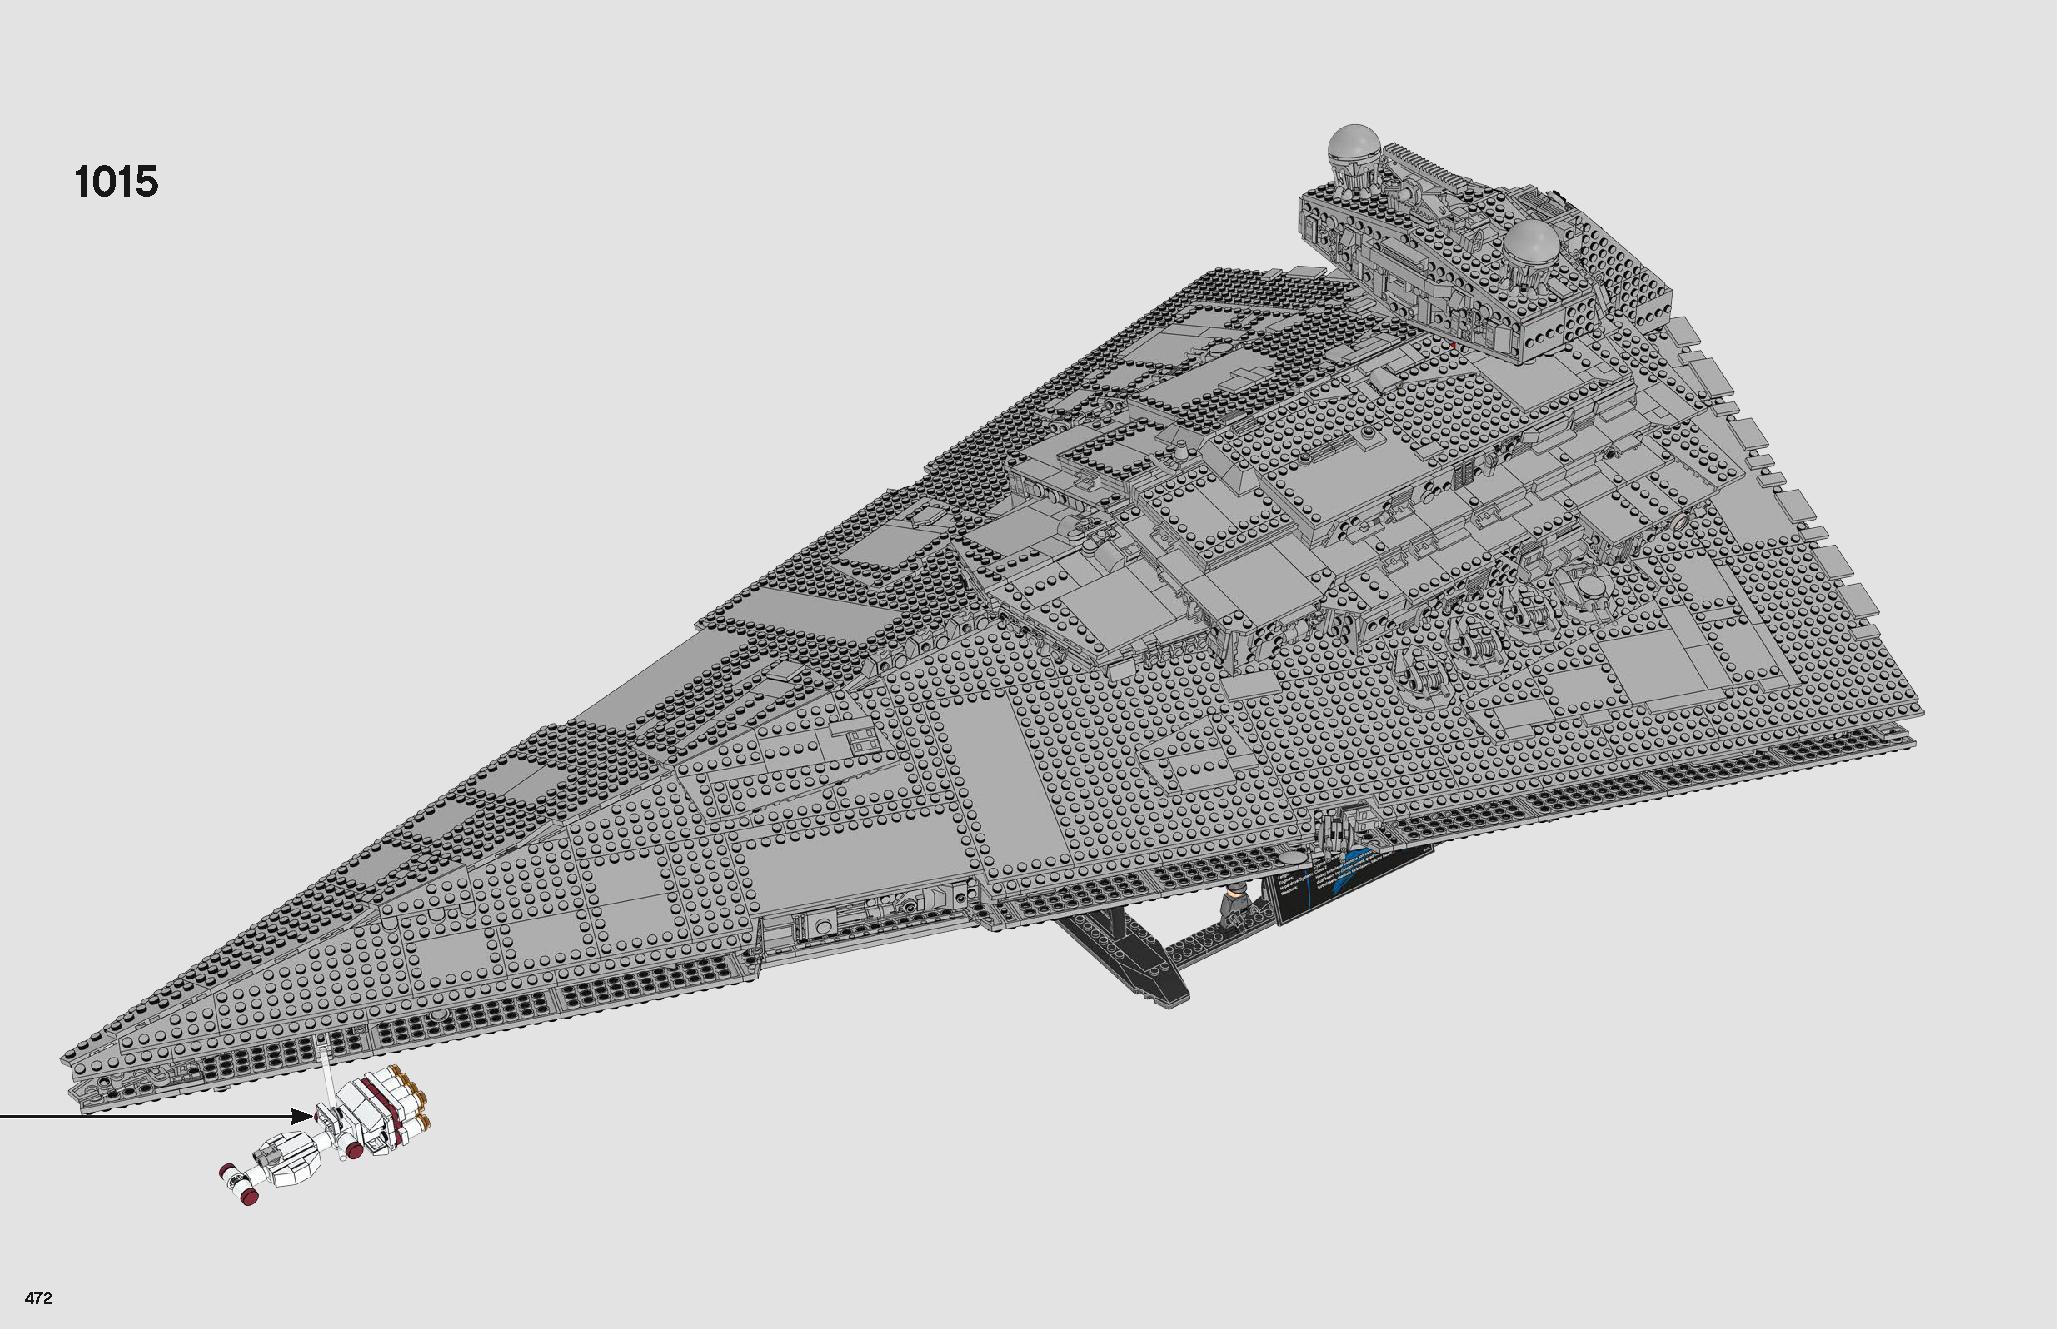 Imperial Star Destroyer 75252 レゴの商品情報 レゴの説明書・組立方法 472 page